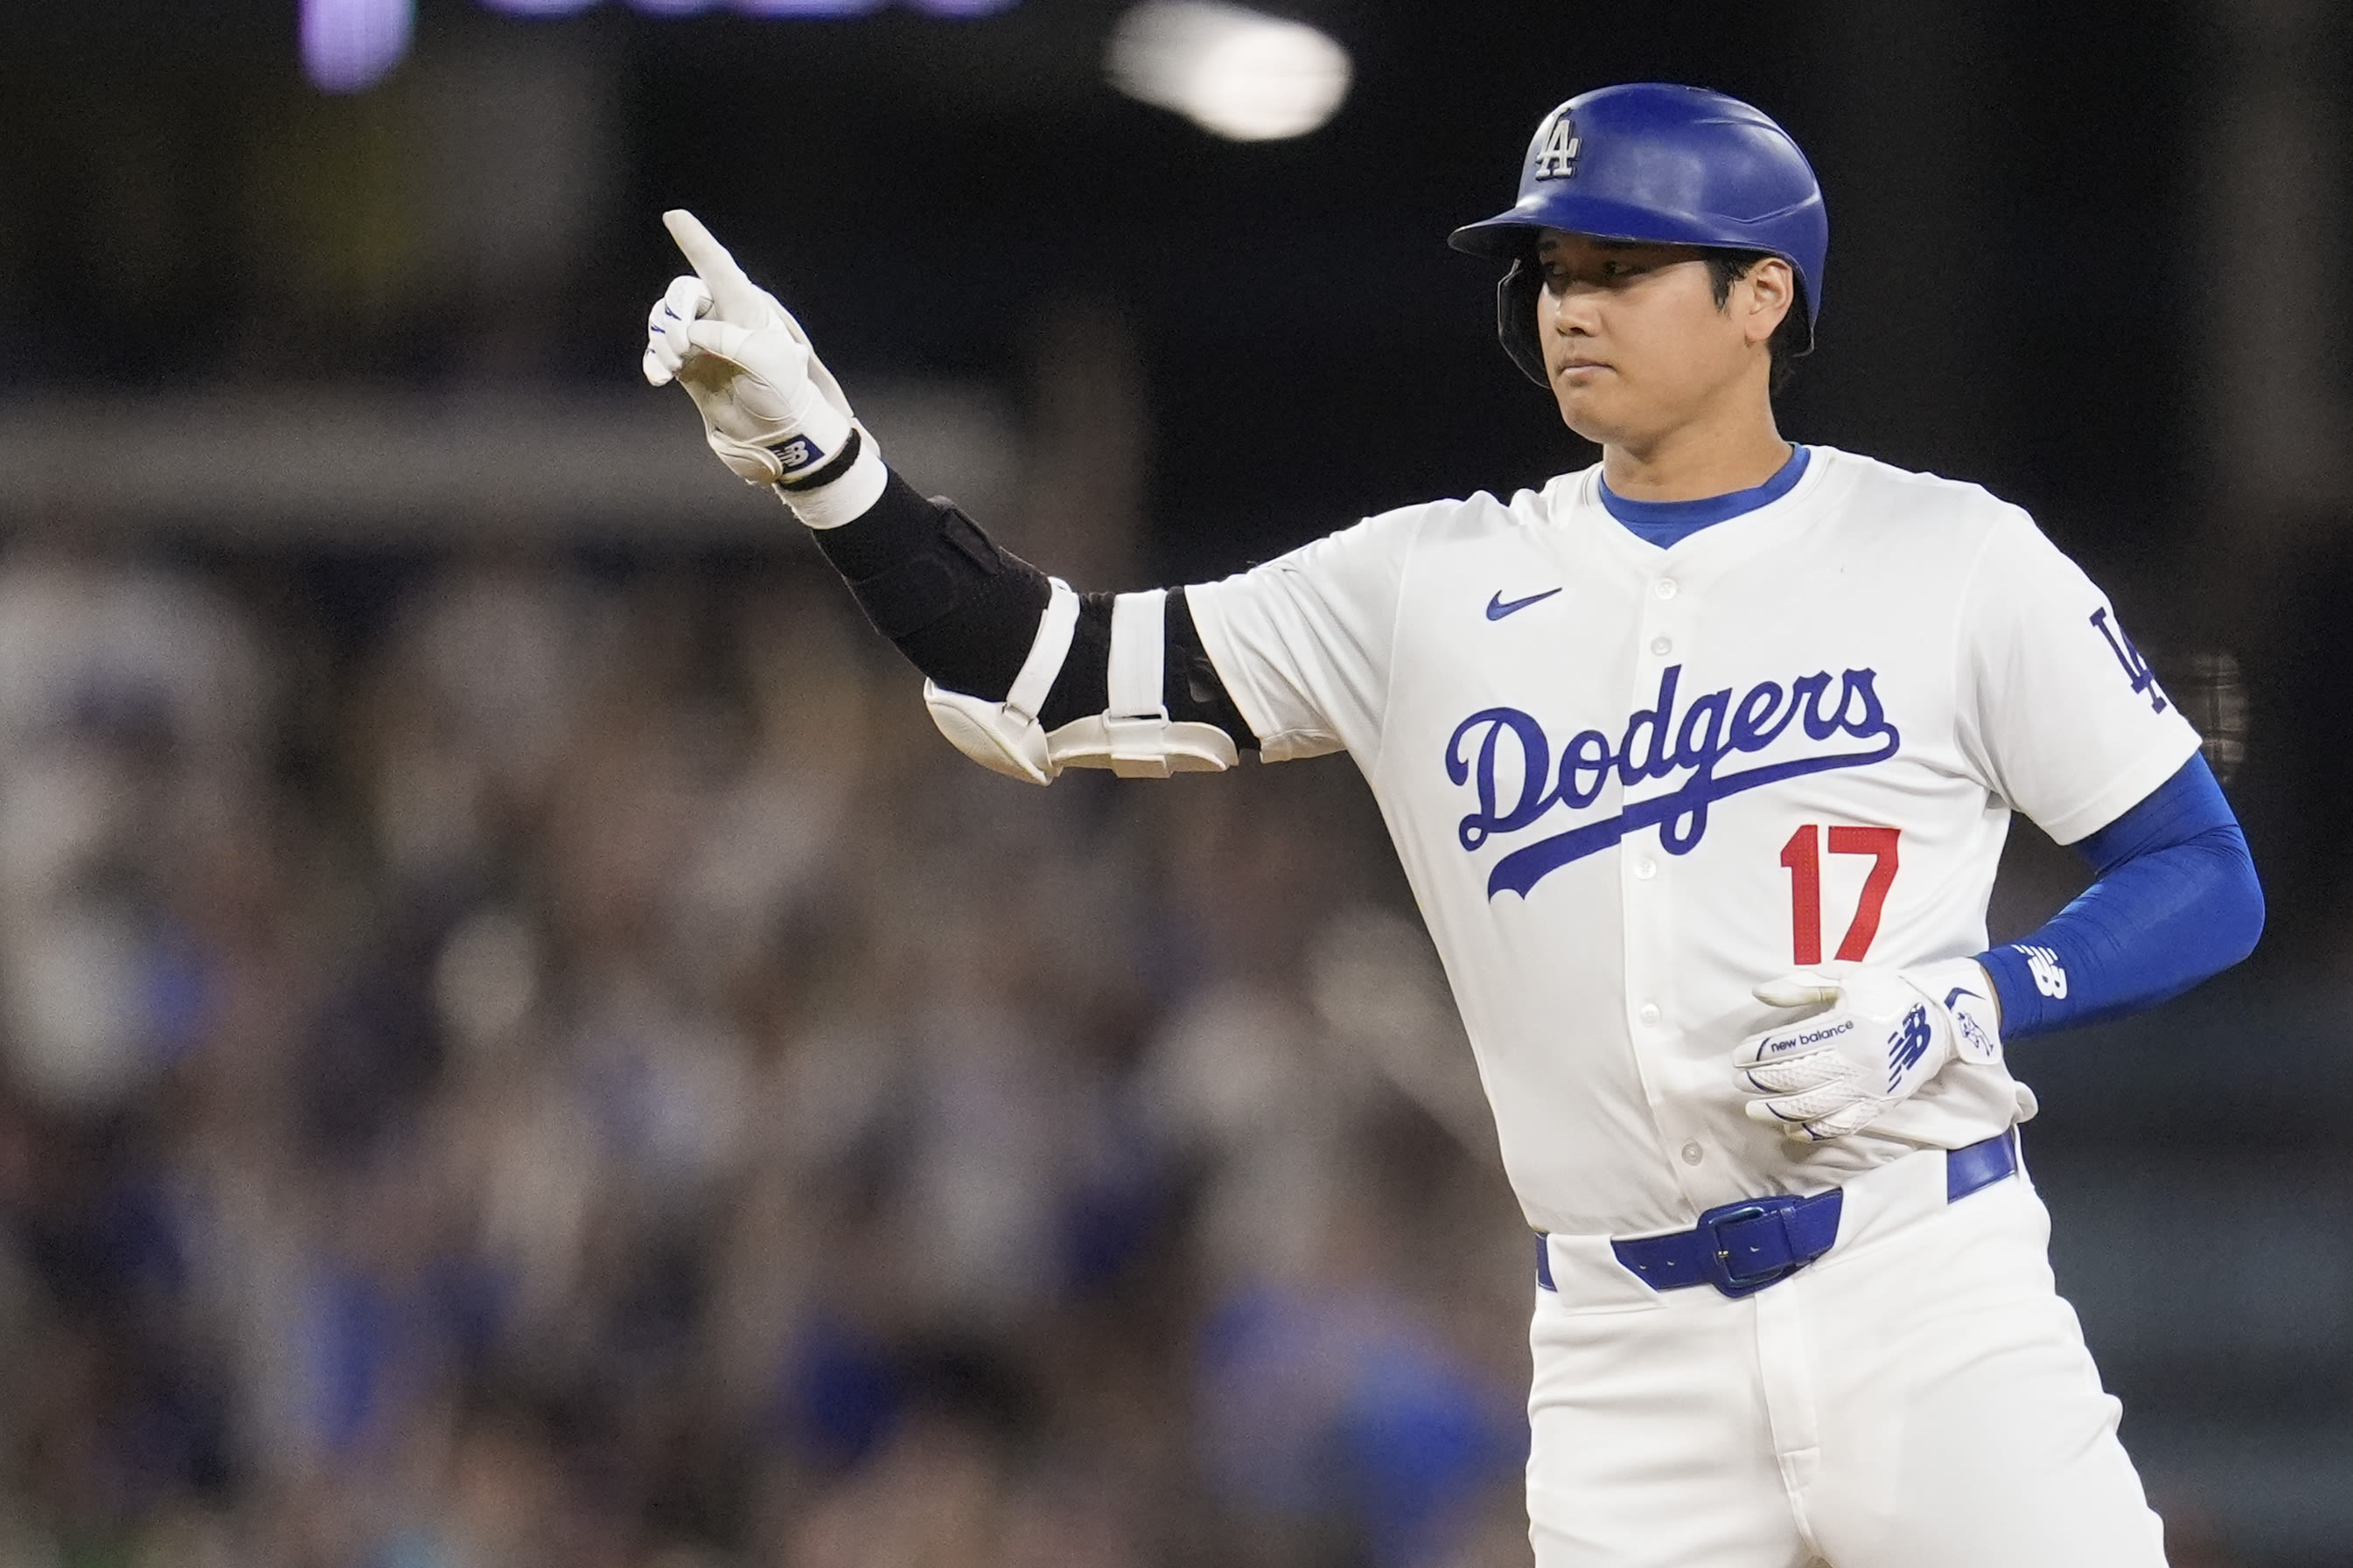 Ohtani drives in 3, Dodgers beat Giants for 5th straight win; SF's Fitzgerald extends HR streak to 5